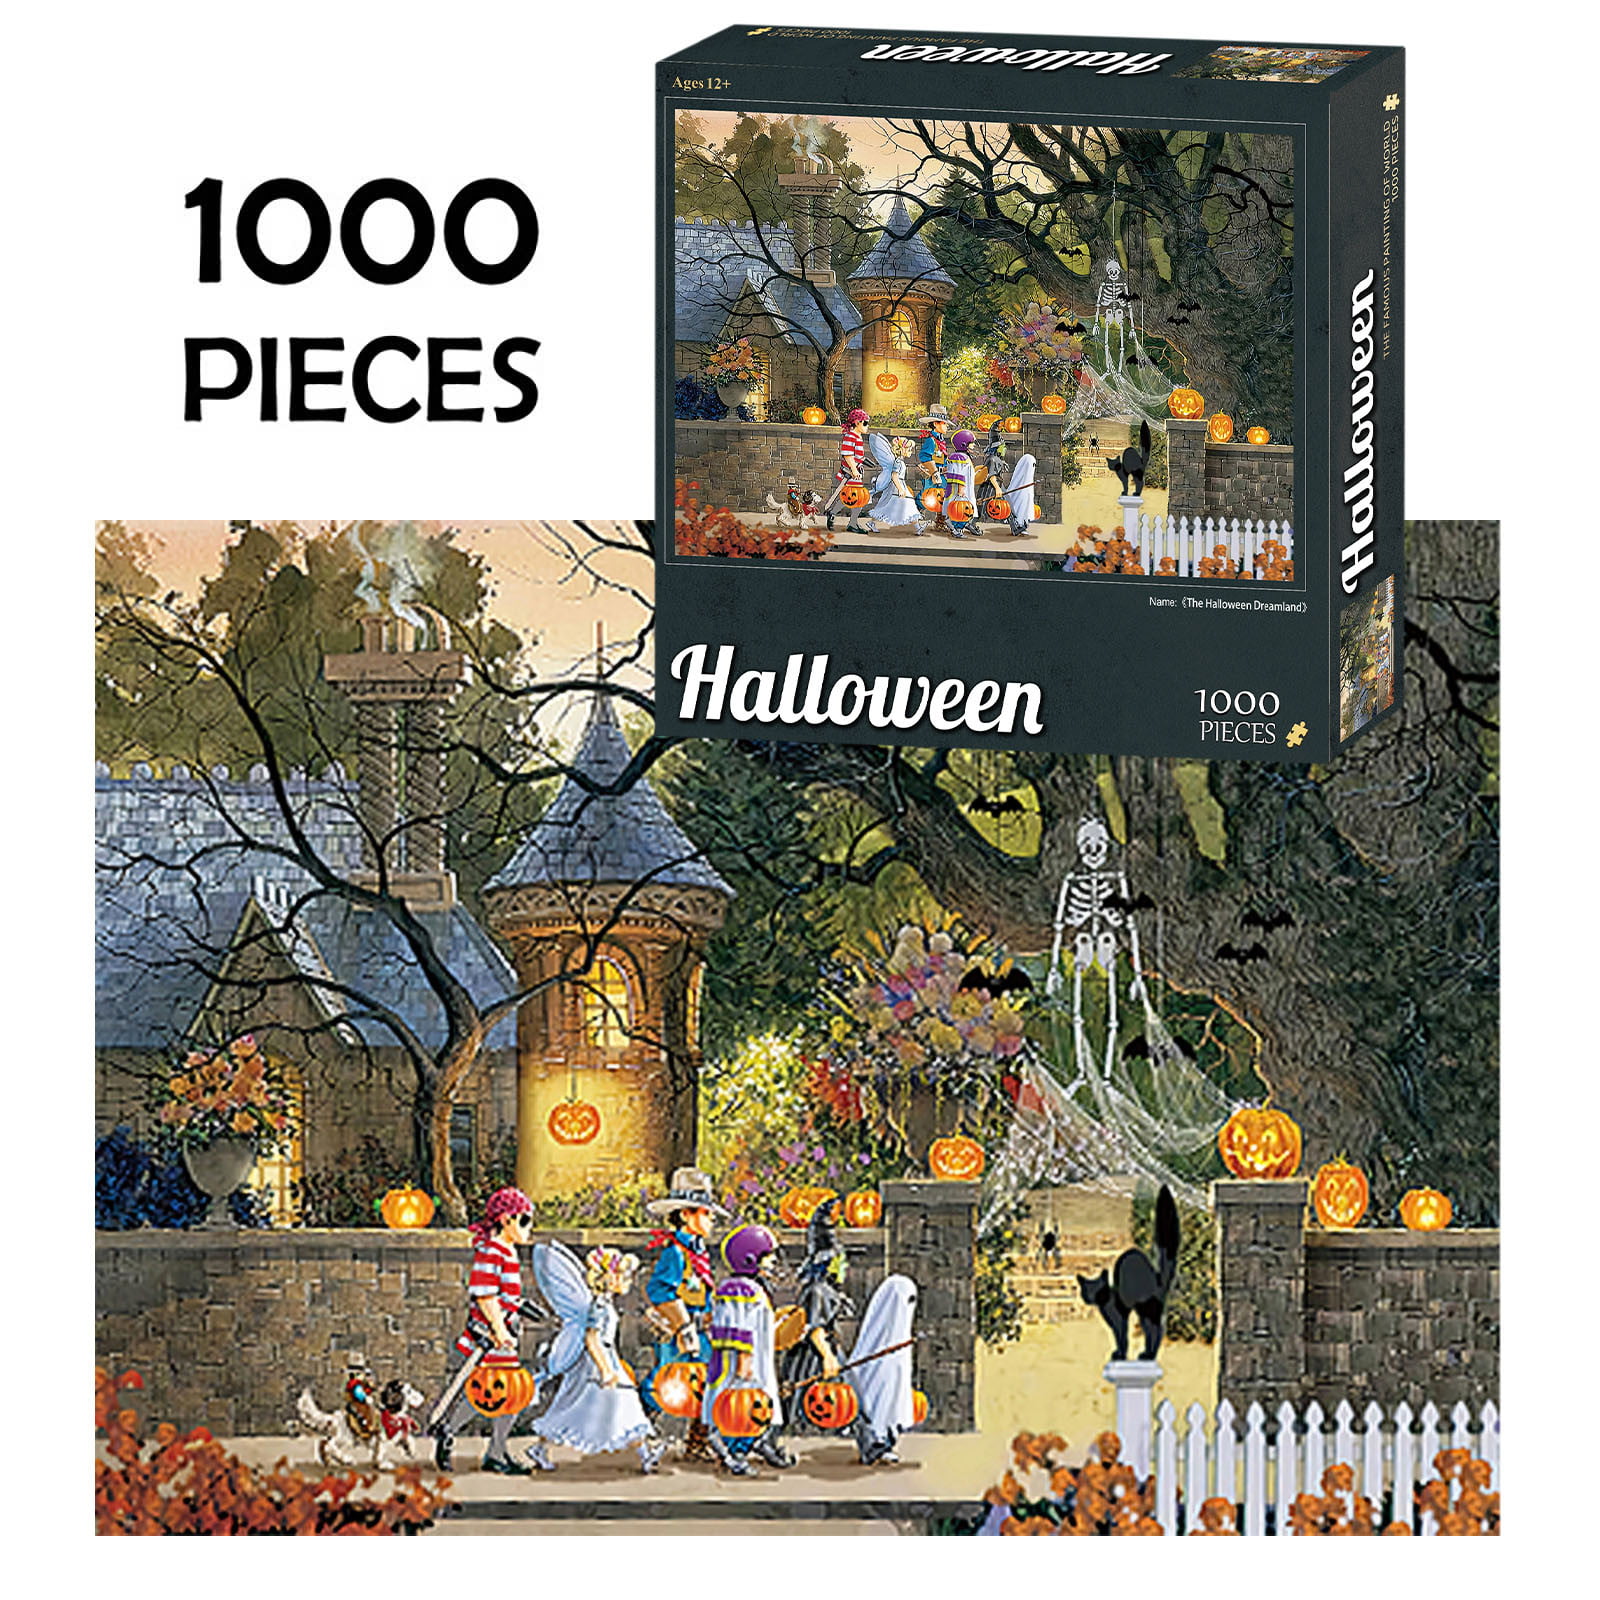 29.53 x 19.69 Pumpkin Witch Ghost House Cute Cartoon Puzzle Educational Games HD Printing A 1000 Pieces Halloween Puzzles for Adults Kids Ideal for Relax Meditation